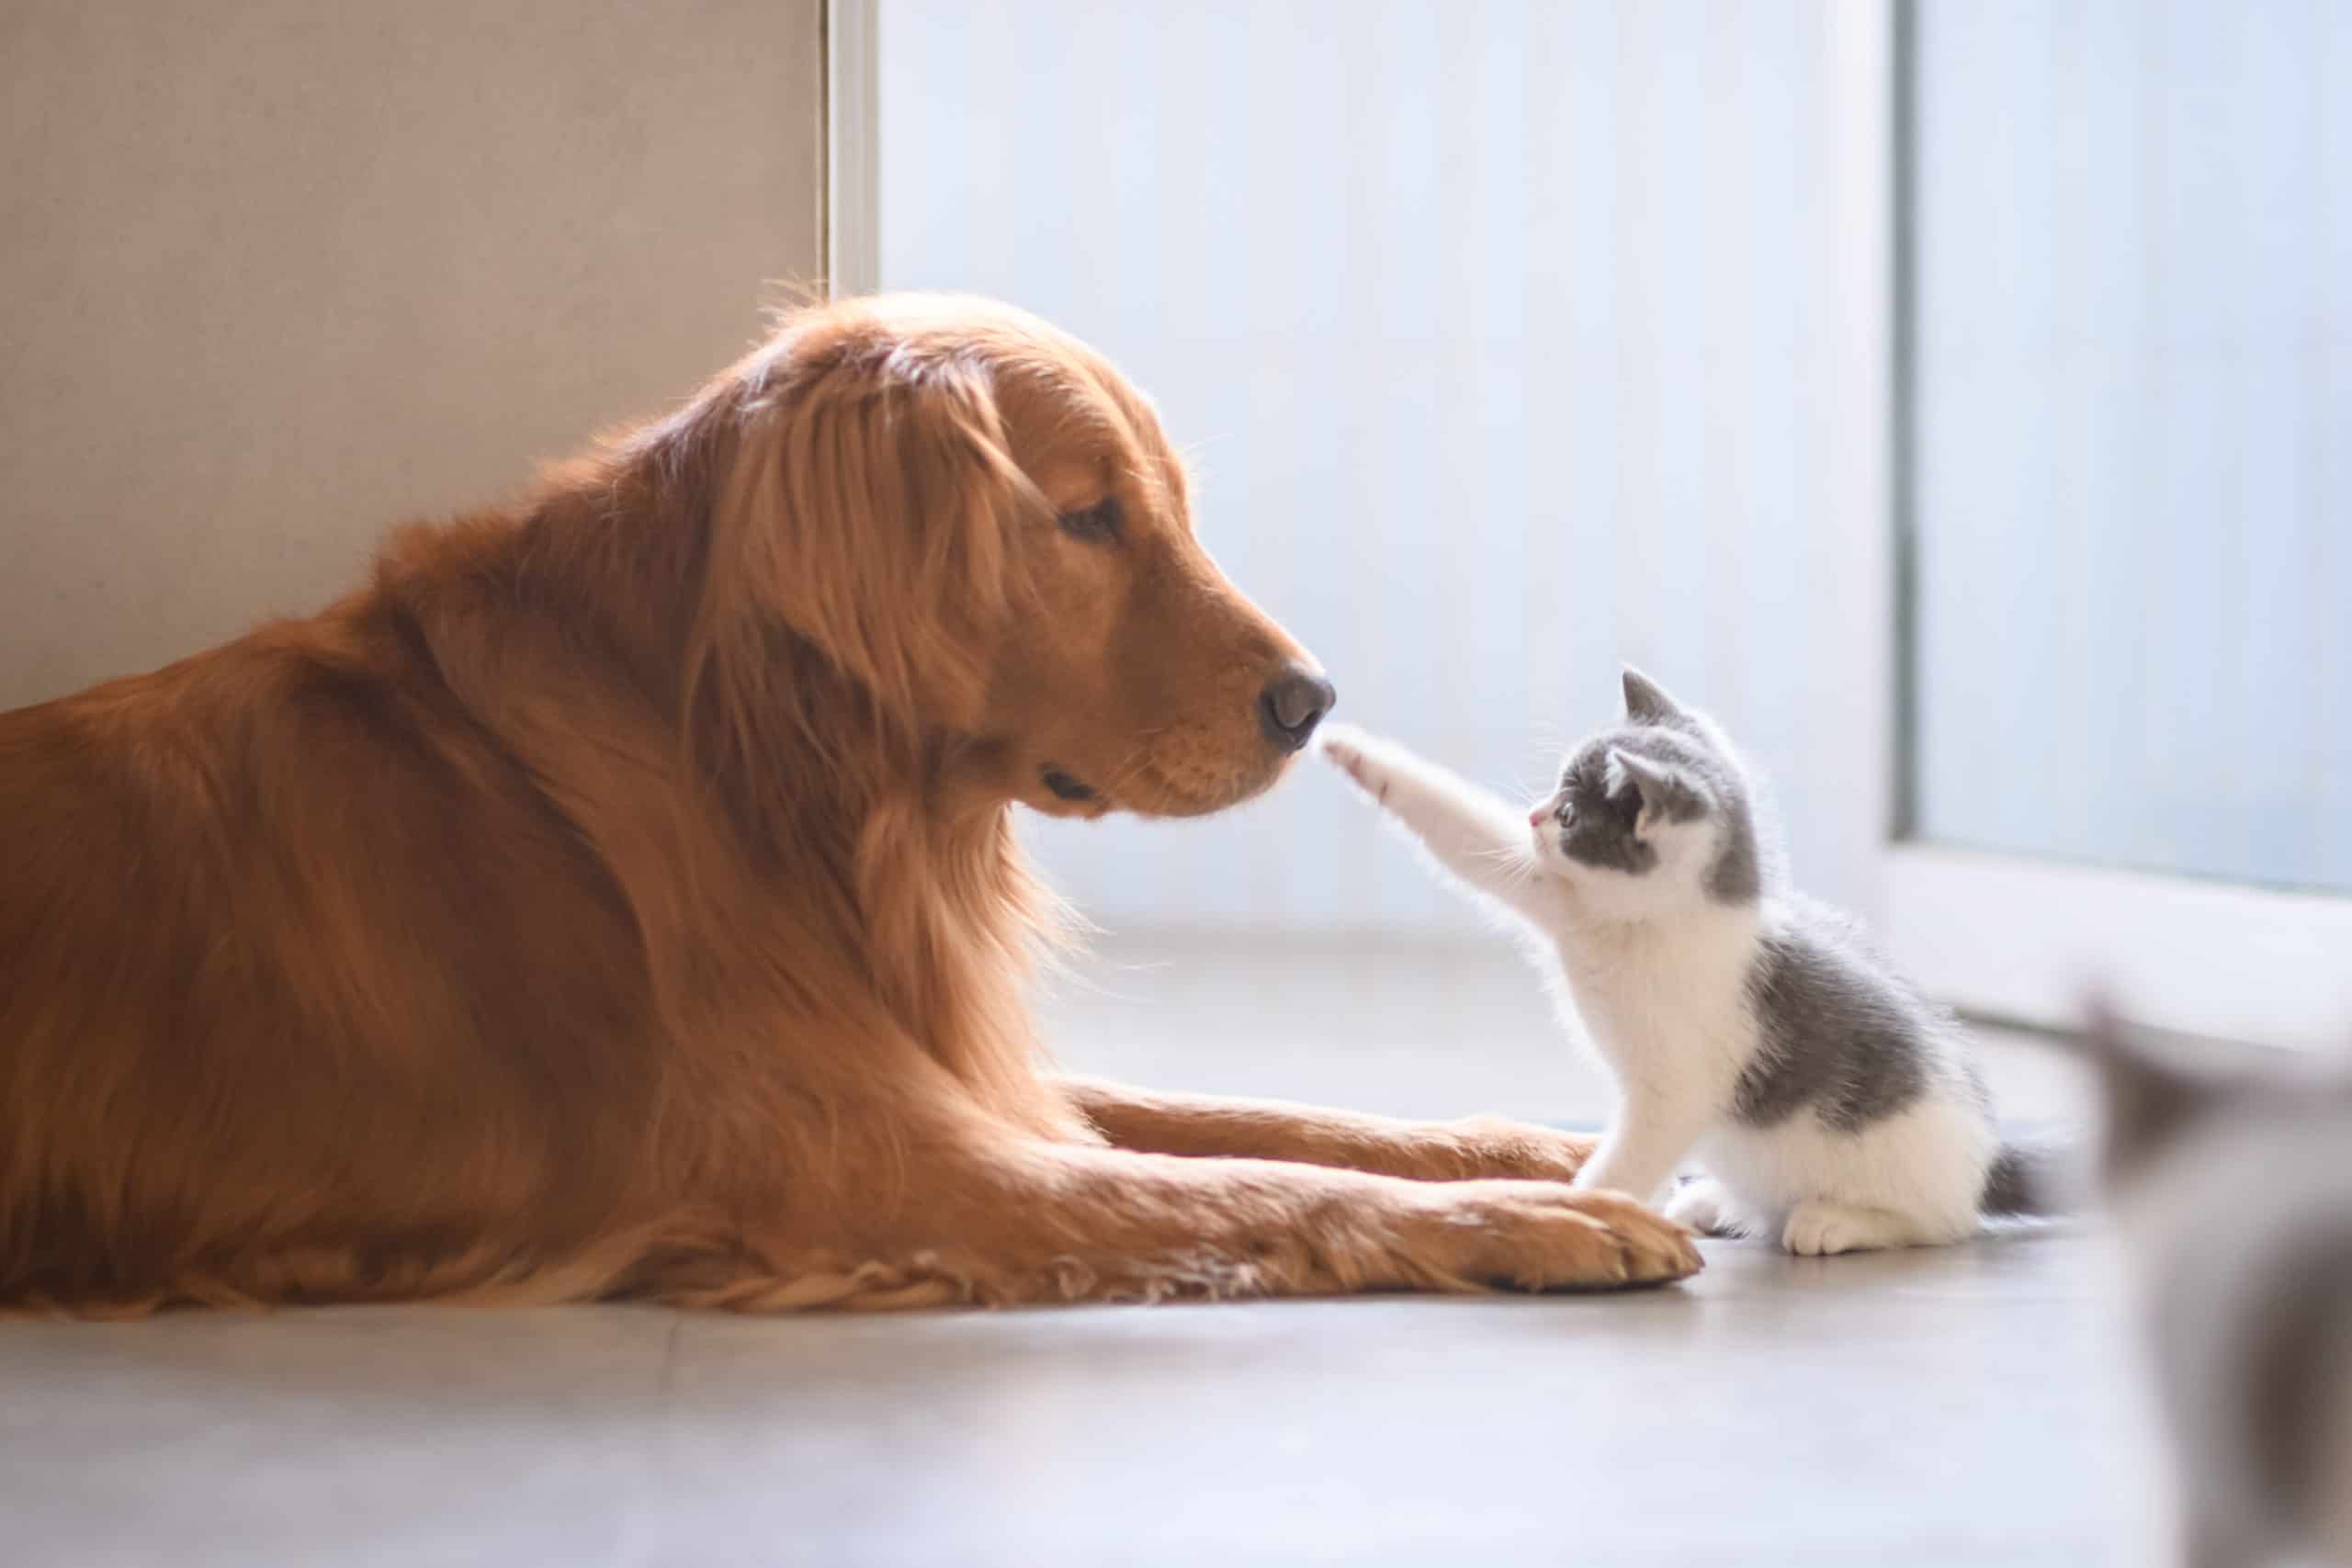 Can a cat mate with a dog?